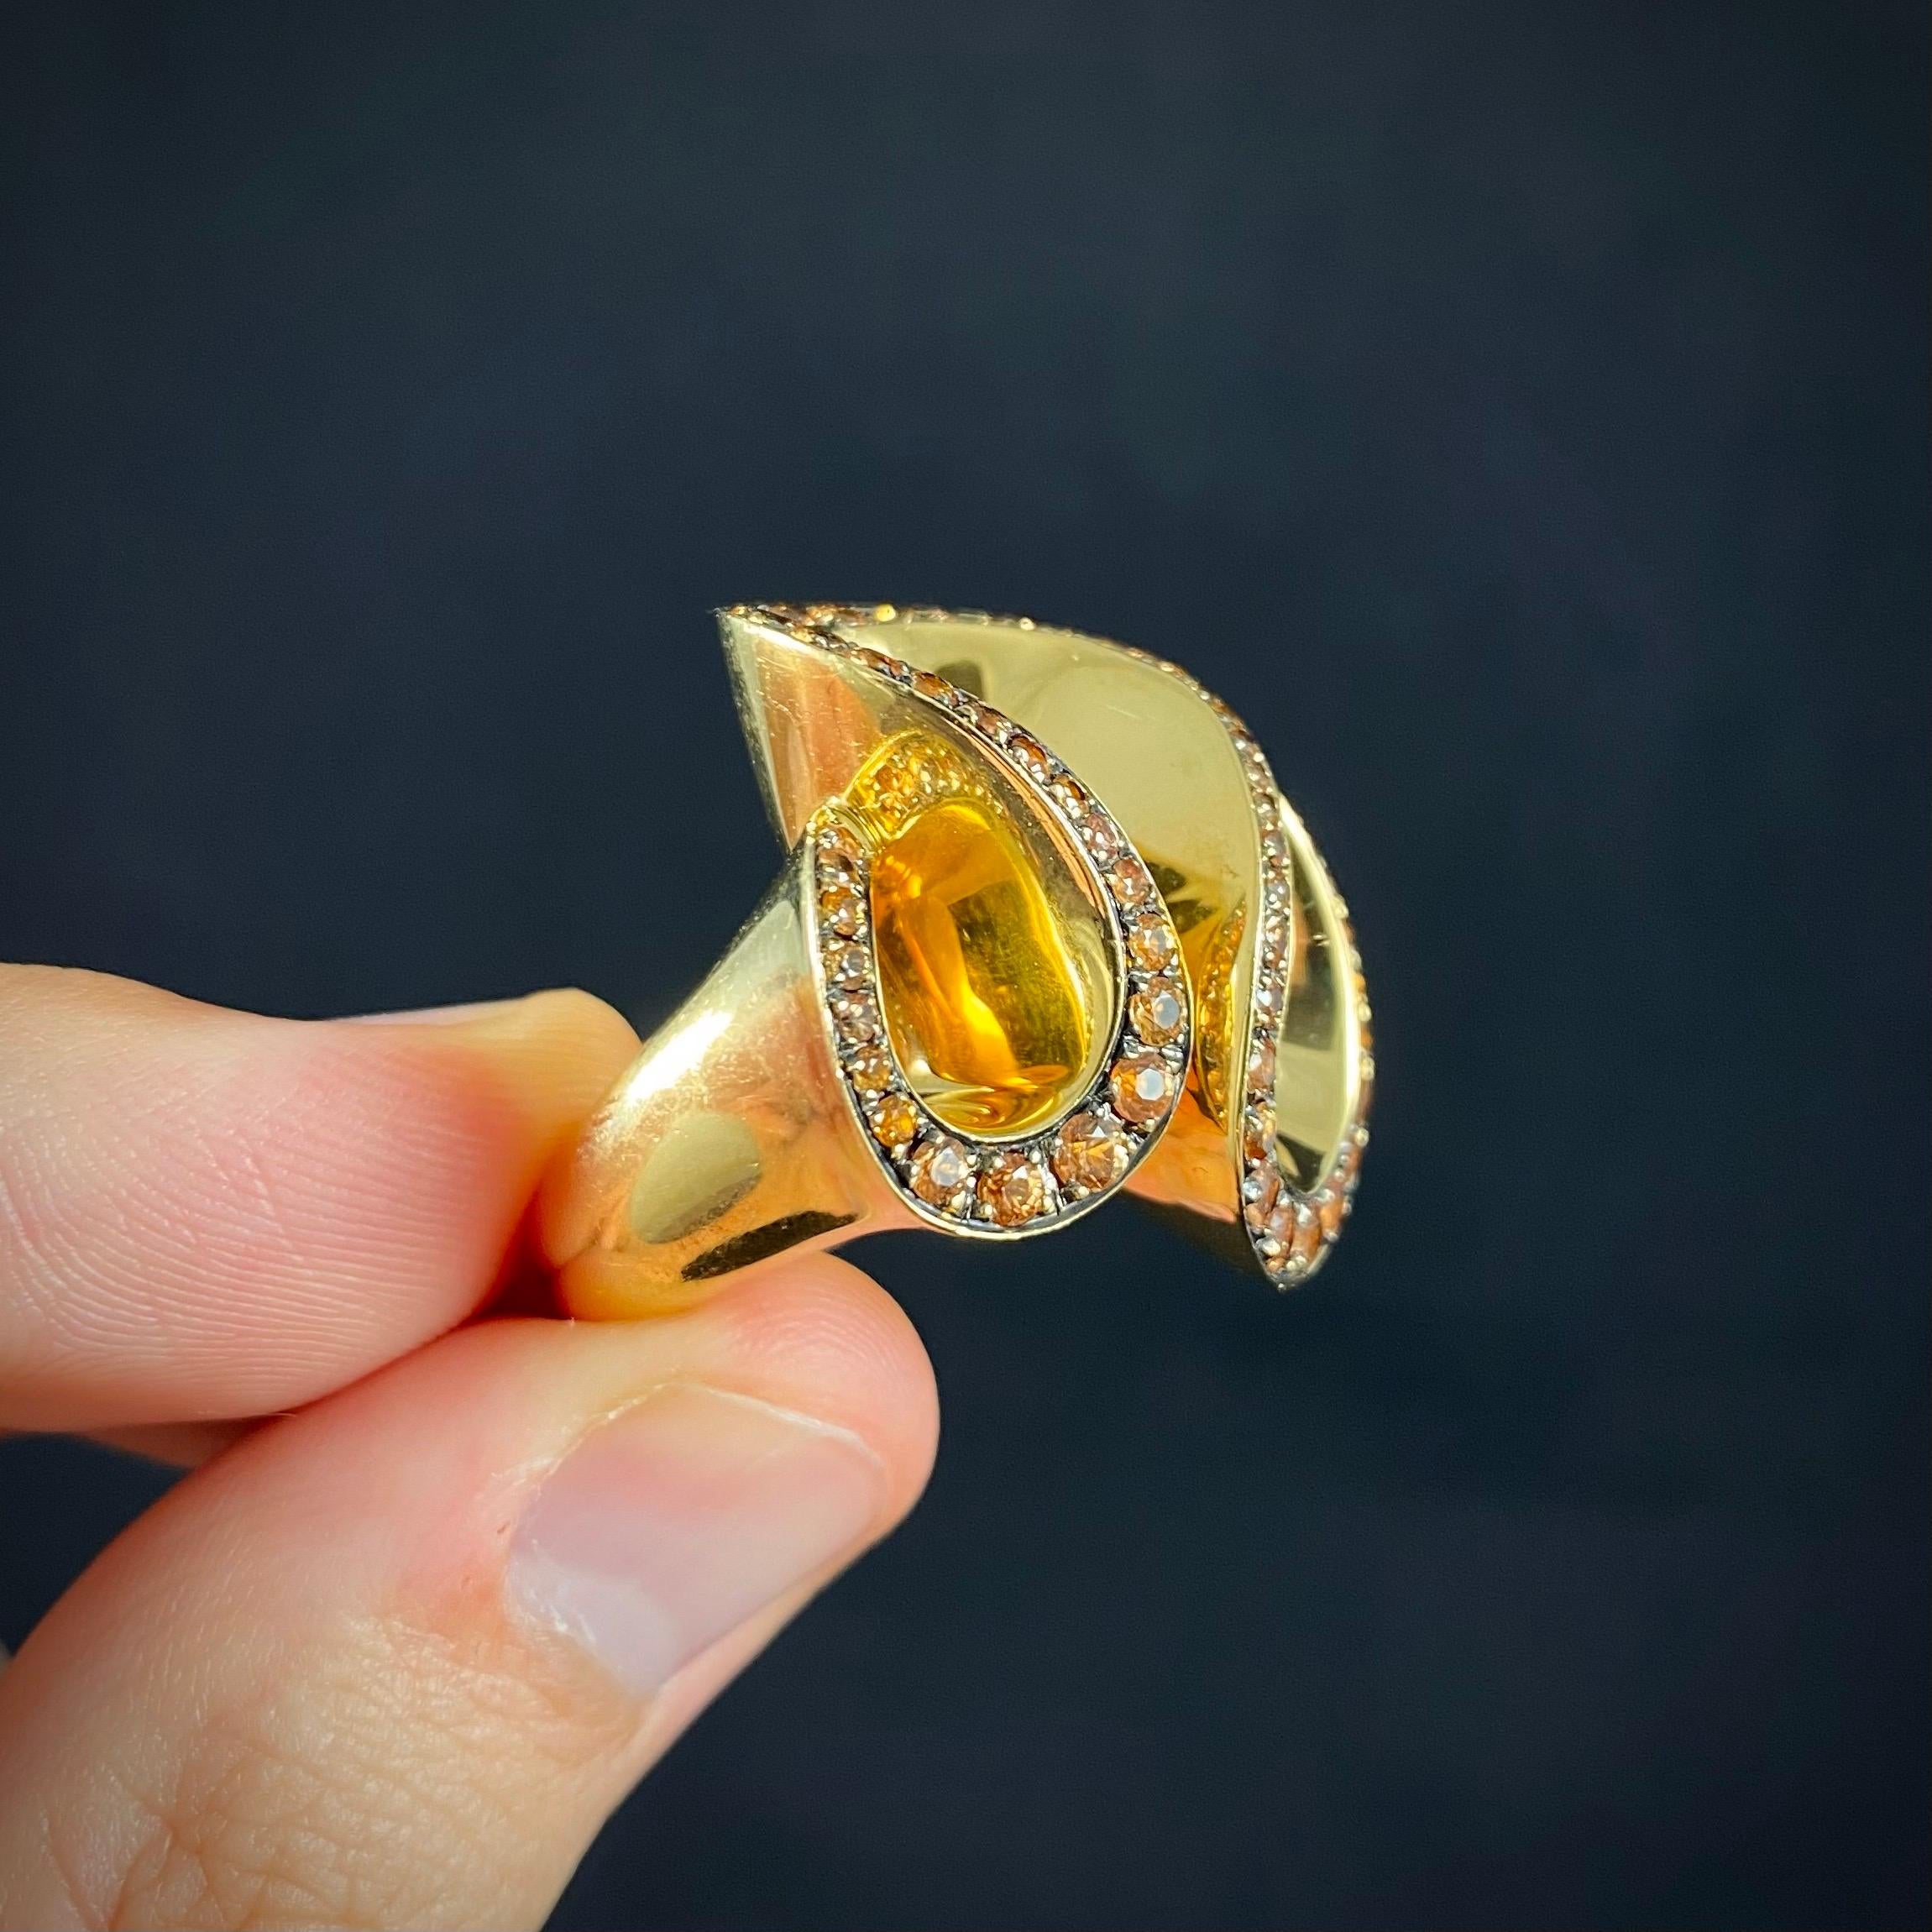 de GRISOGONO Zingana Round Yellow Sapphire Abstract Cocktail Ring Yellow Gold In Good Condition For Sale In Lisbon, PT